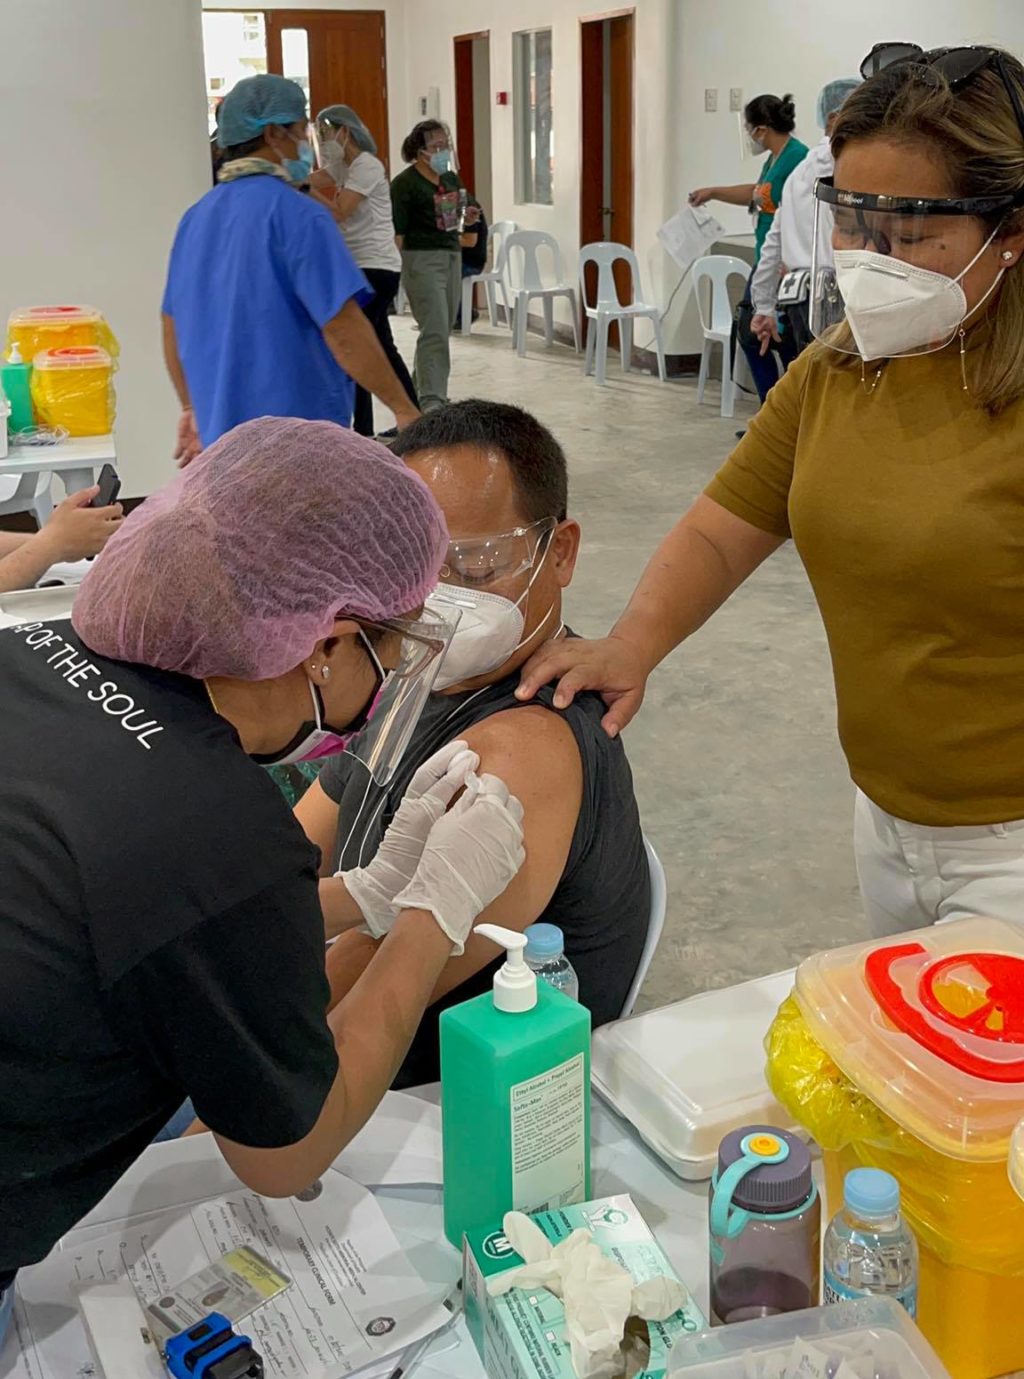 EOC VACCINATION. Cebu City Councilor Joel Garganera gets vaccinated to encourage EOC personnel to follow suit.| Photo courtesy of EOC